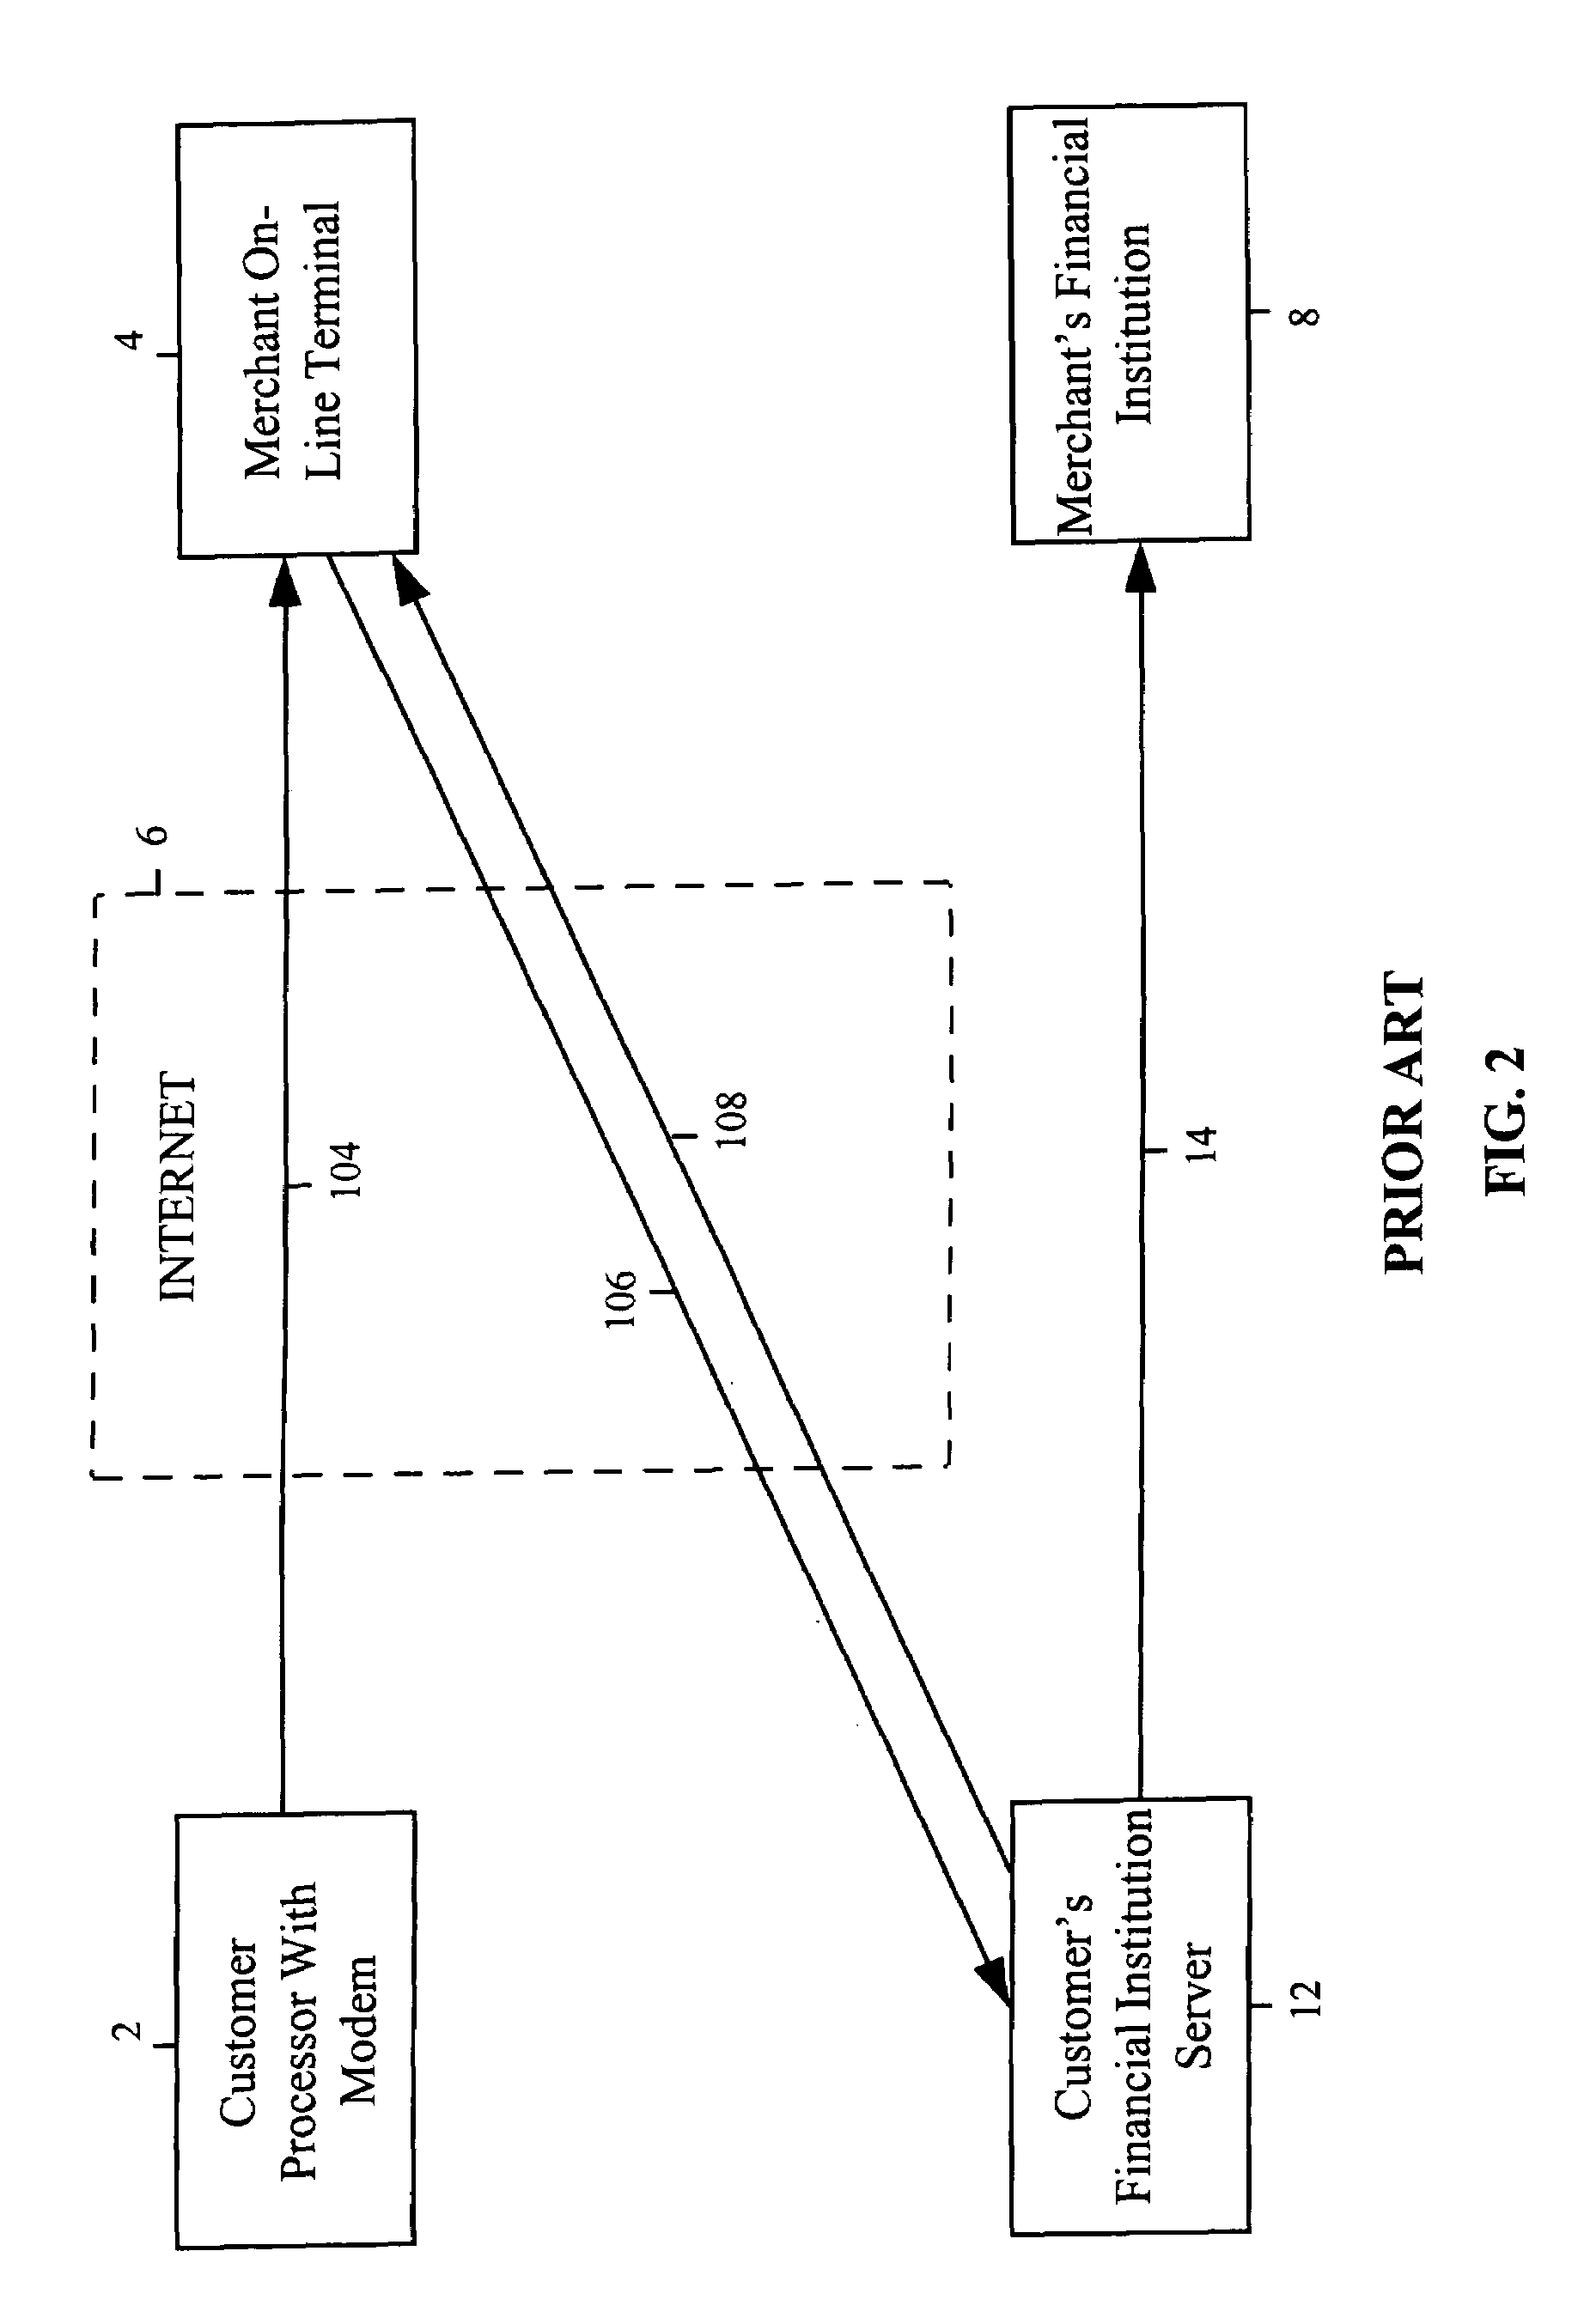 System and method for merchant function assumption of internet checking and savings account transactions